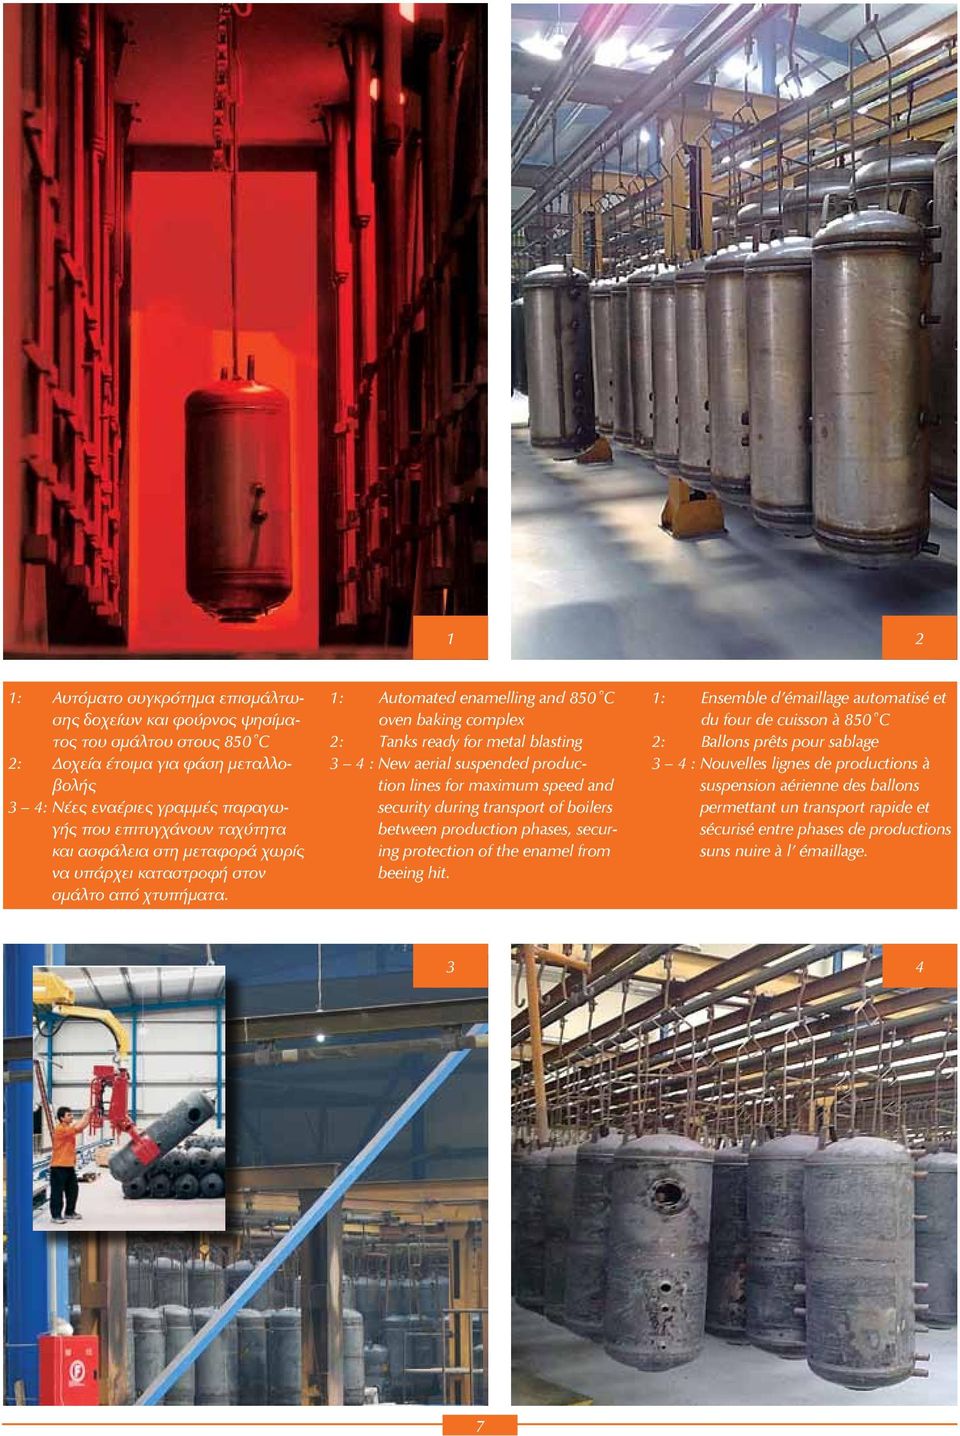 1: Automated enamelling and 850 C oven baking complex 2: Tanks ready for metal blasting 3 4 : New aerial suspended production lines for maximum speed and security during transport of boilers between